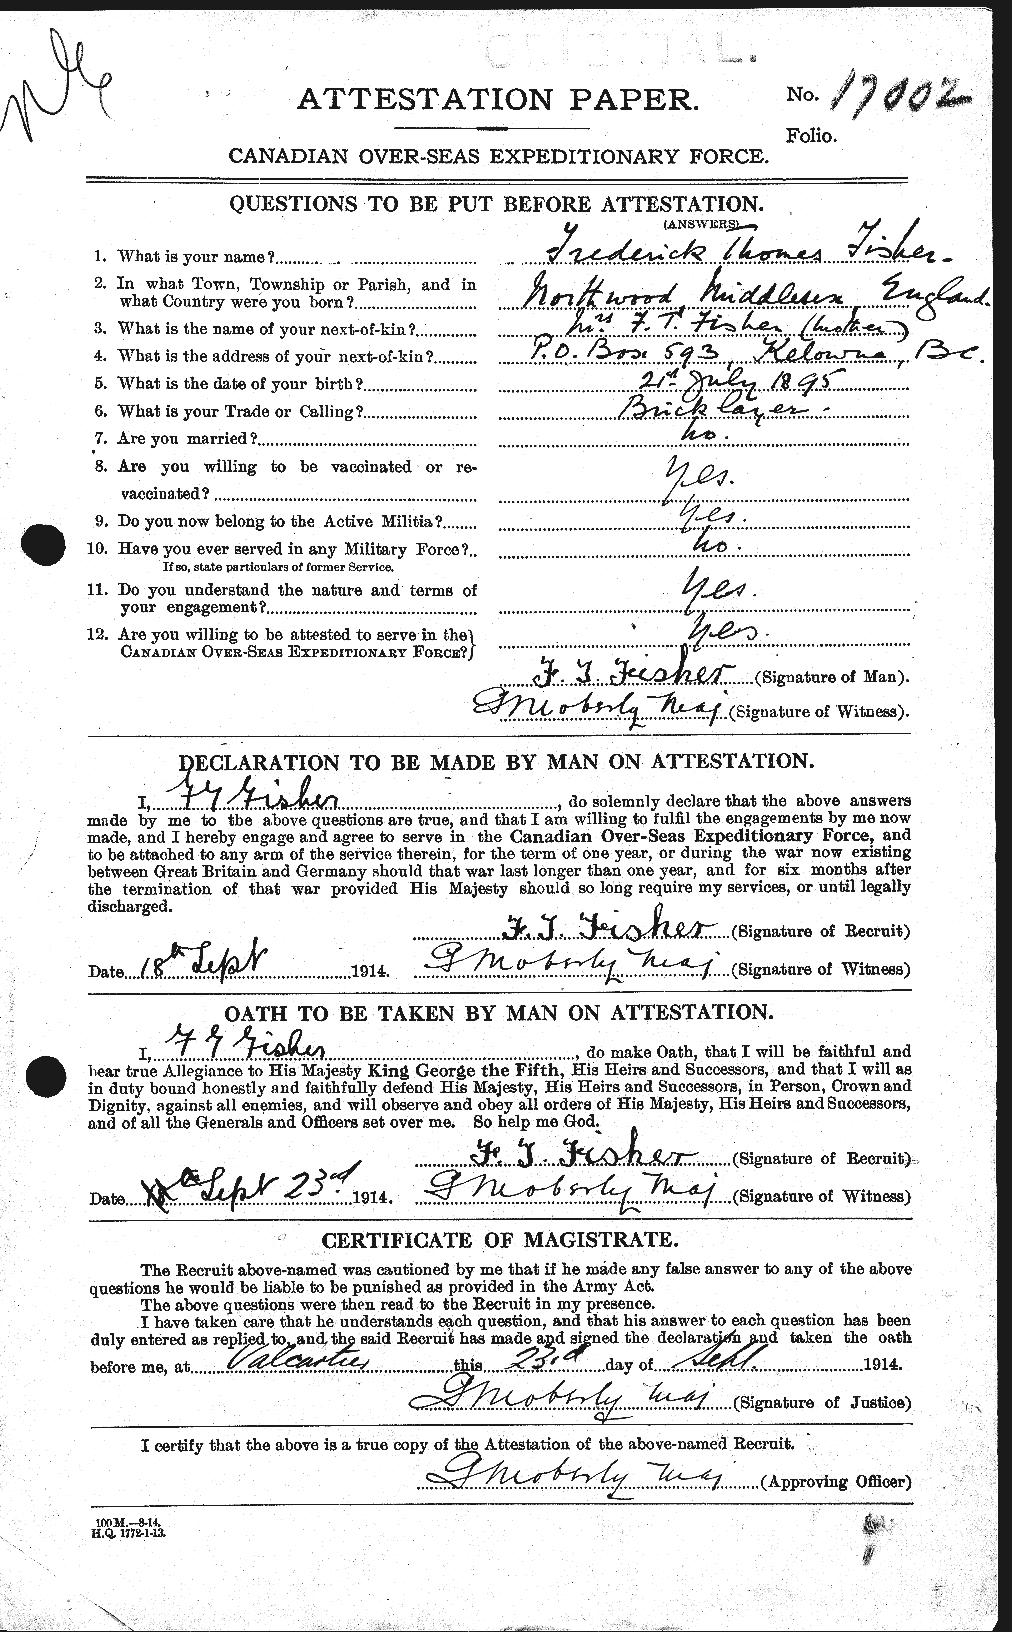 Personnel Records of the First World War - CEF 325906a